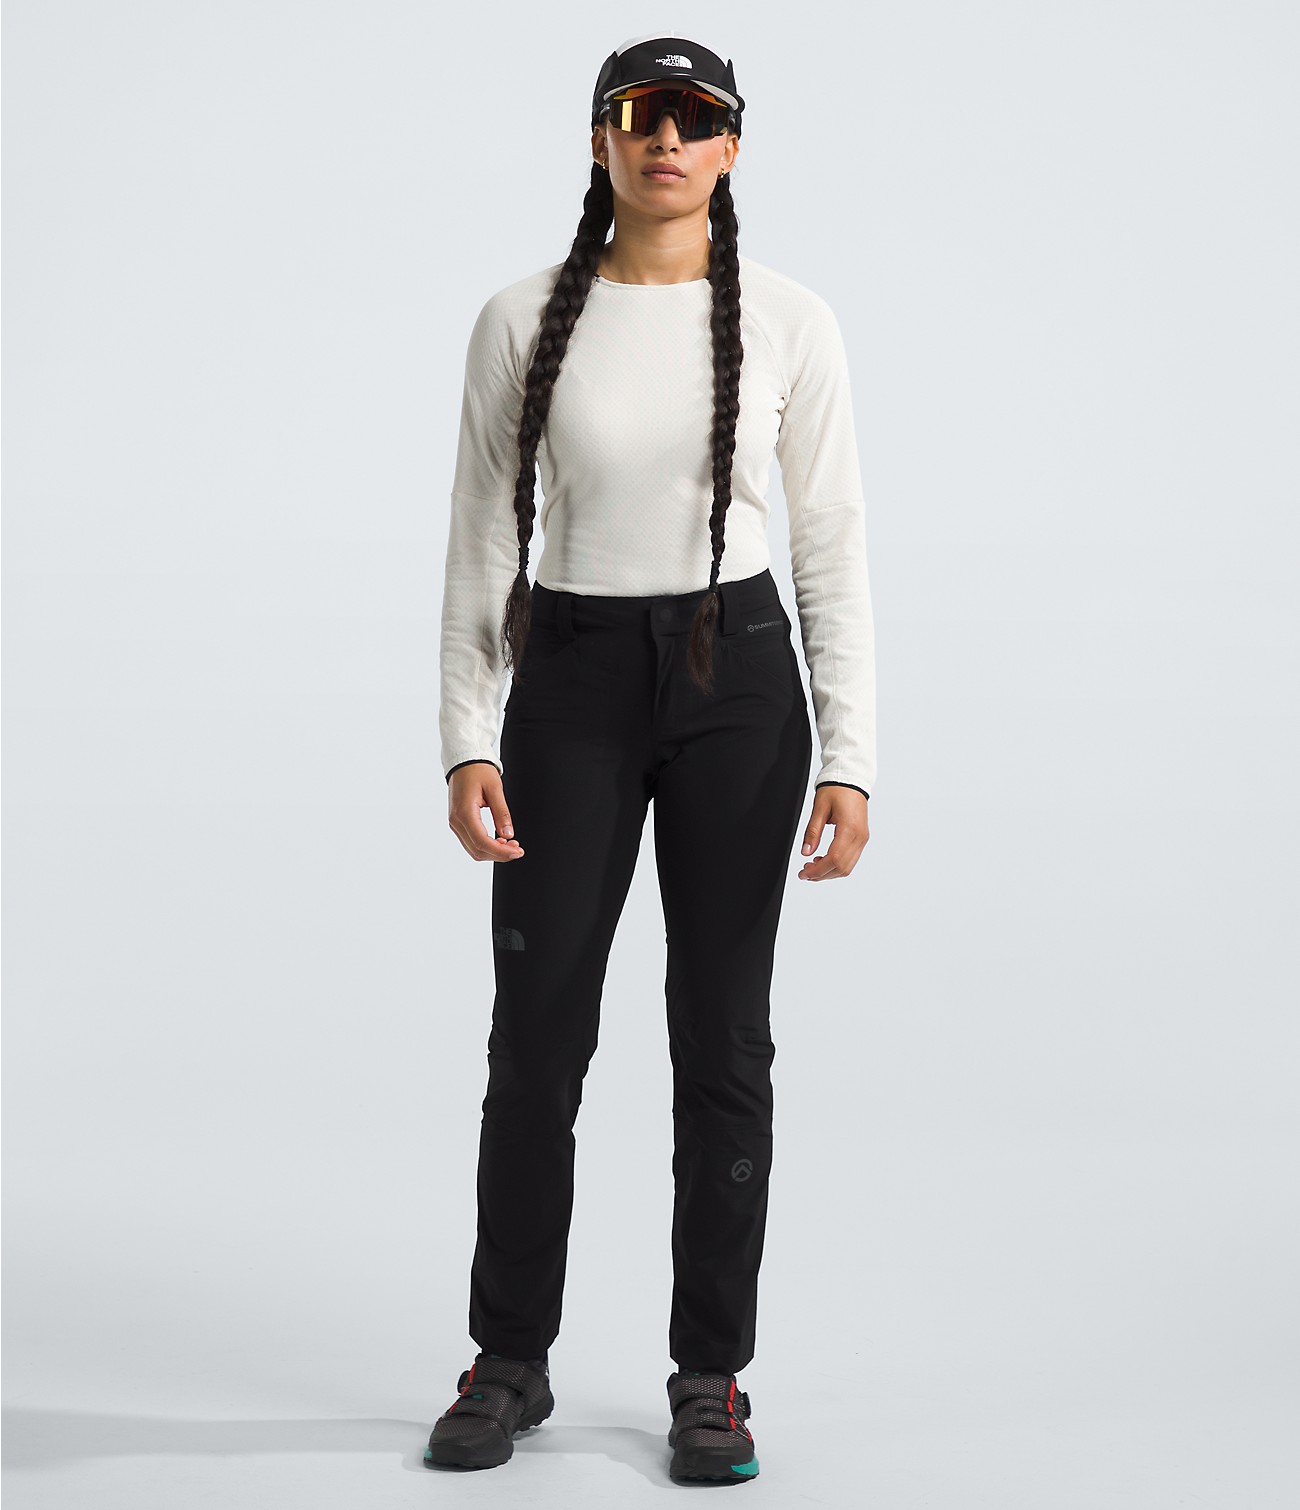 Women’s Summit Series Off Width Pants | The North Face